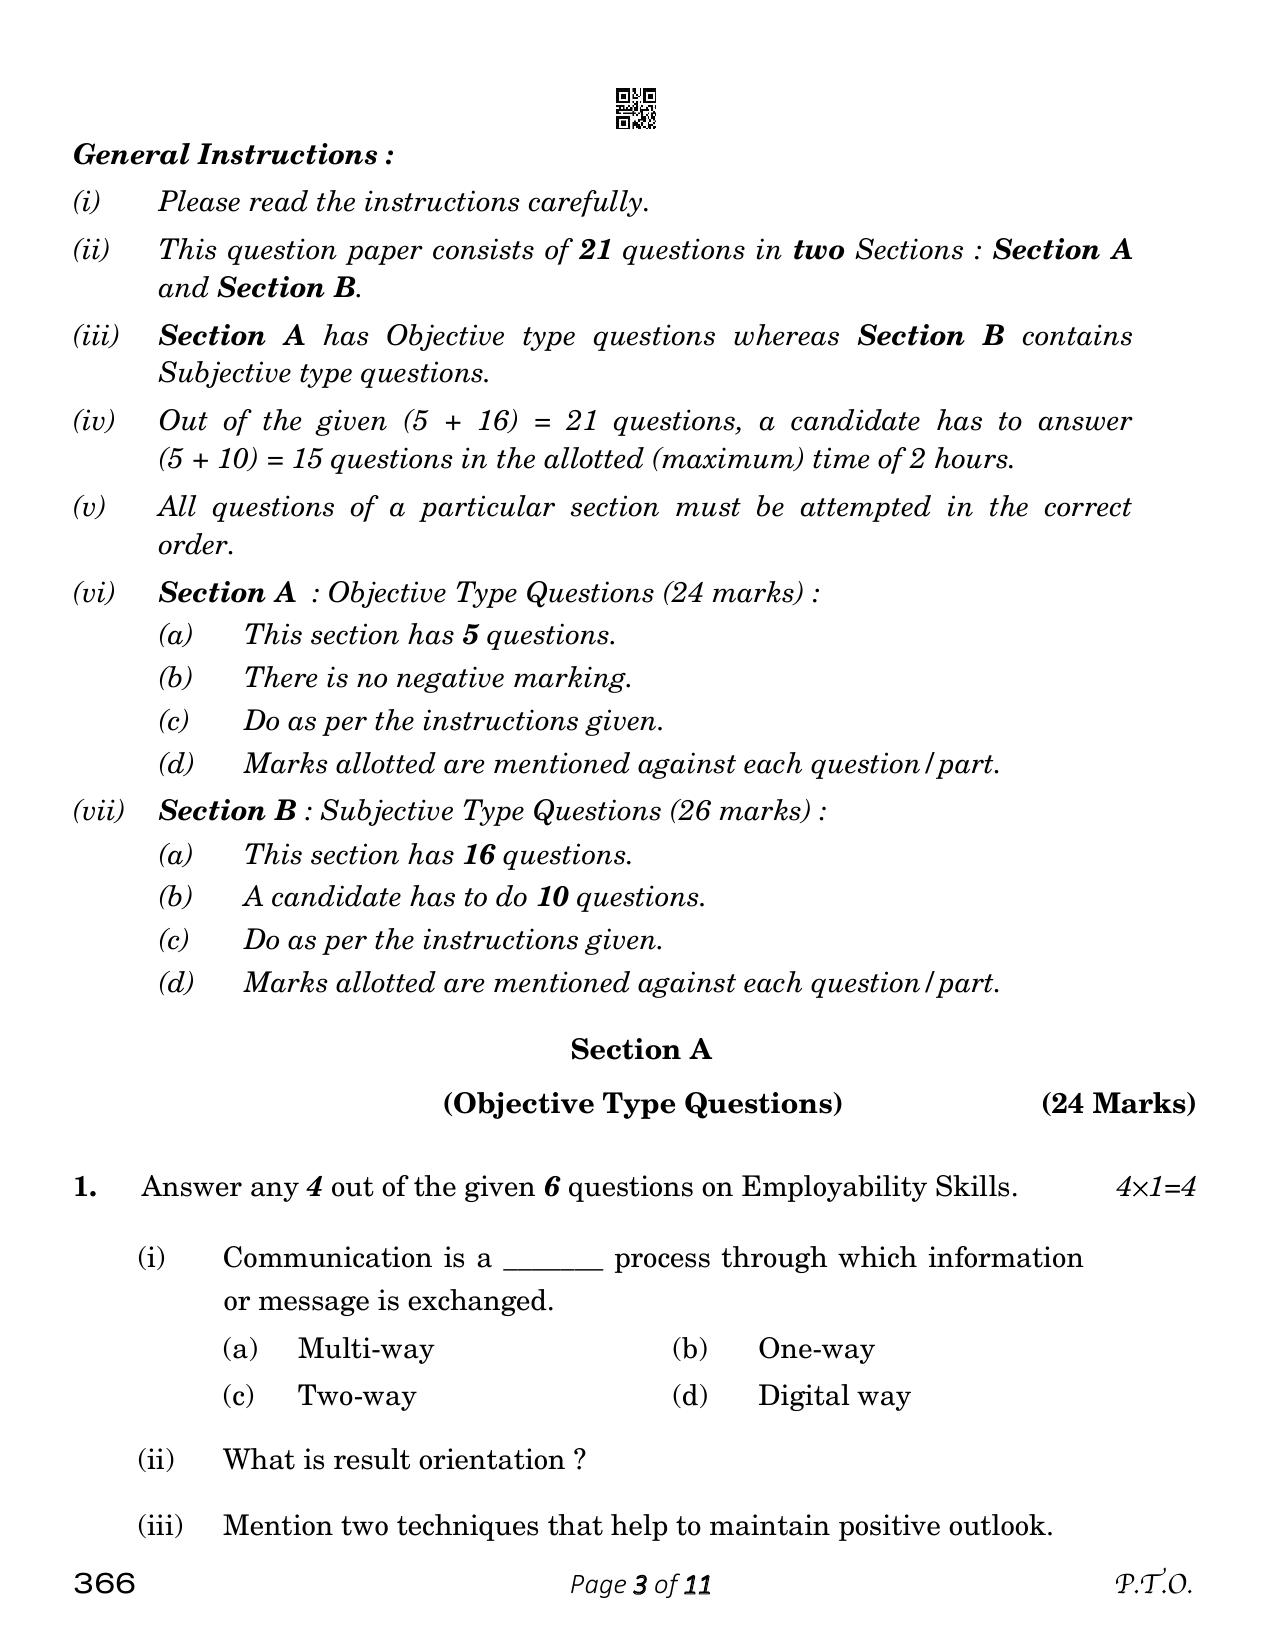 CBSE Class 12 Early Childhood Care & Education (Compartment) 2023 Question Paper - Page 3